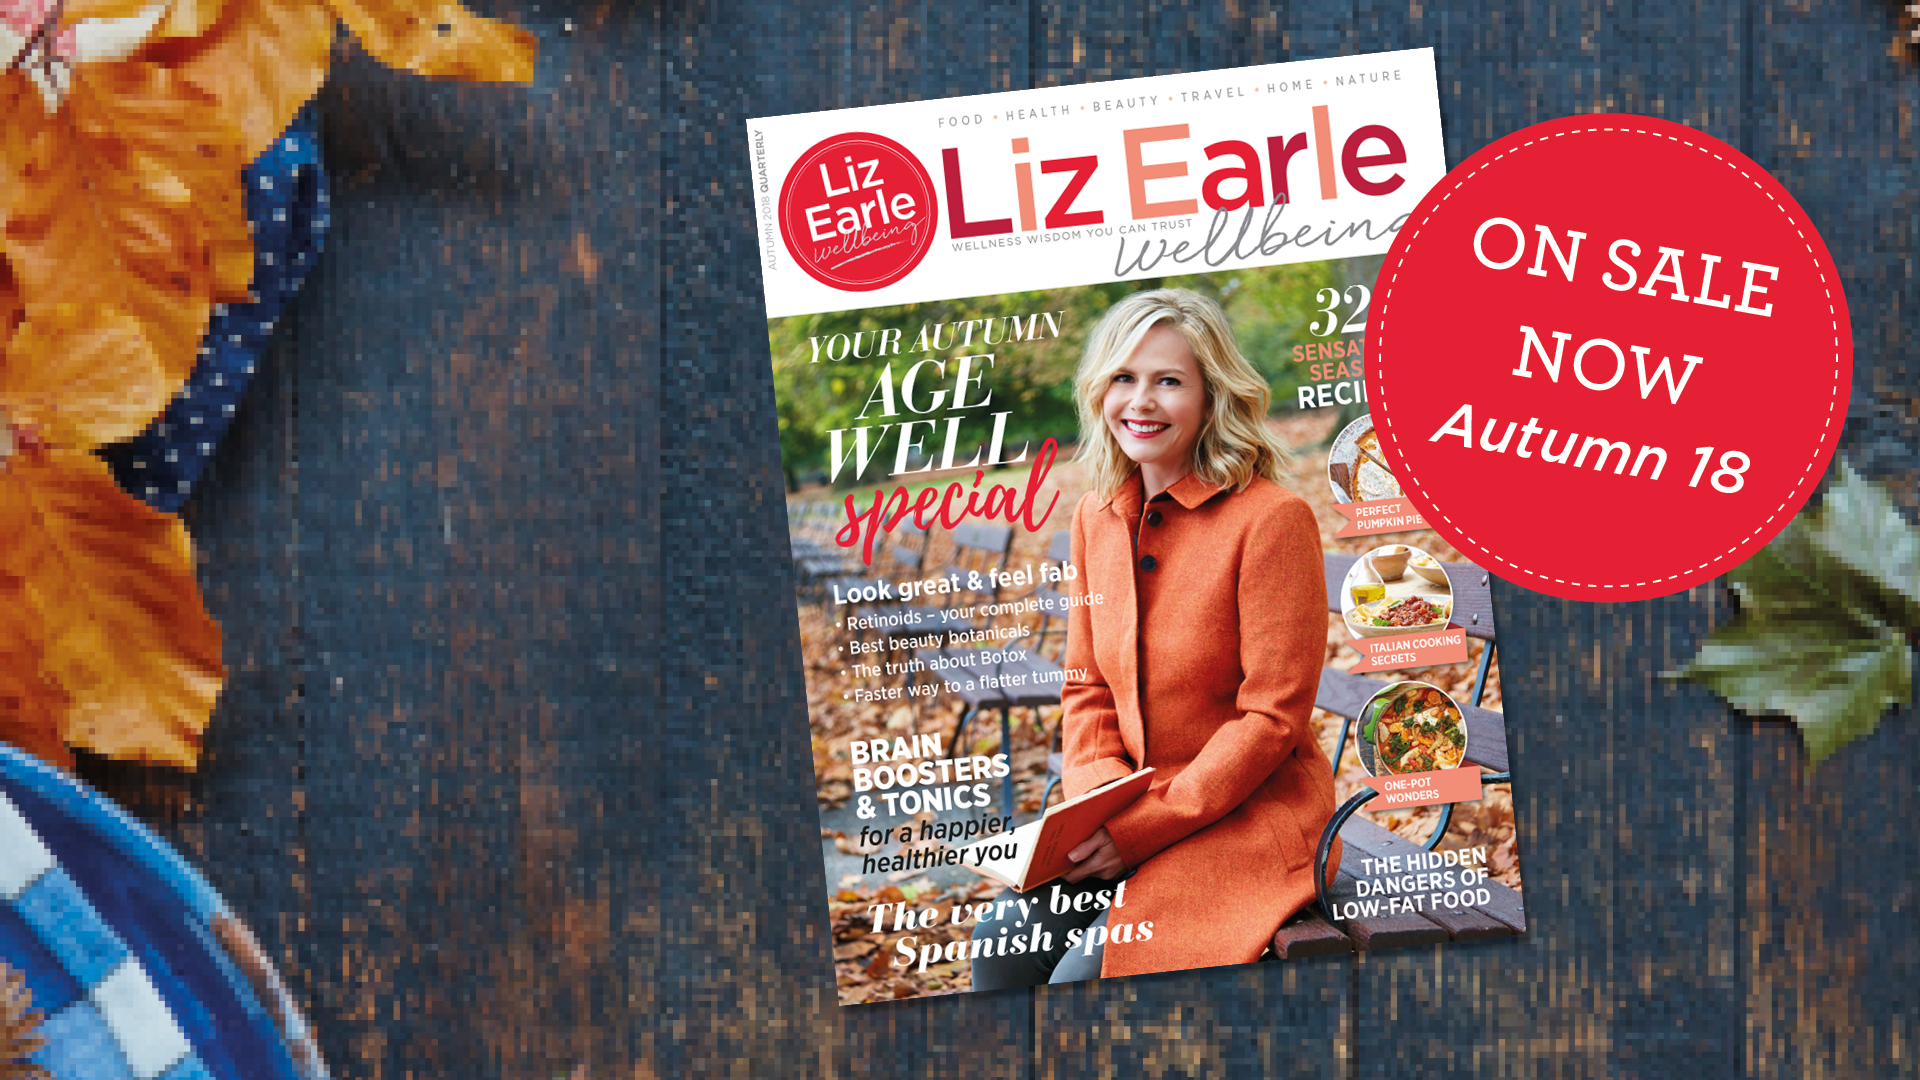 Liz Earle Wellbeing - Autumn 2018 edition on sale now